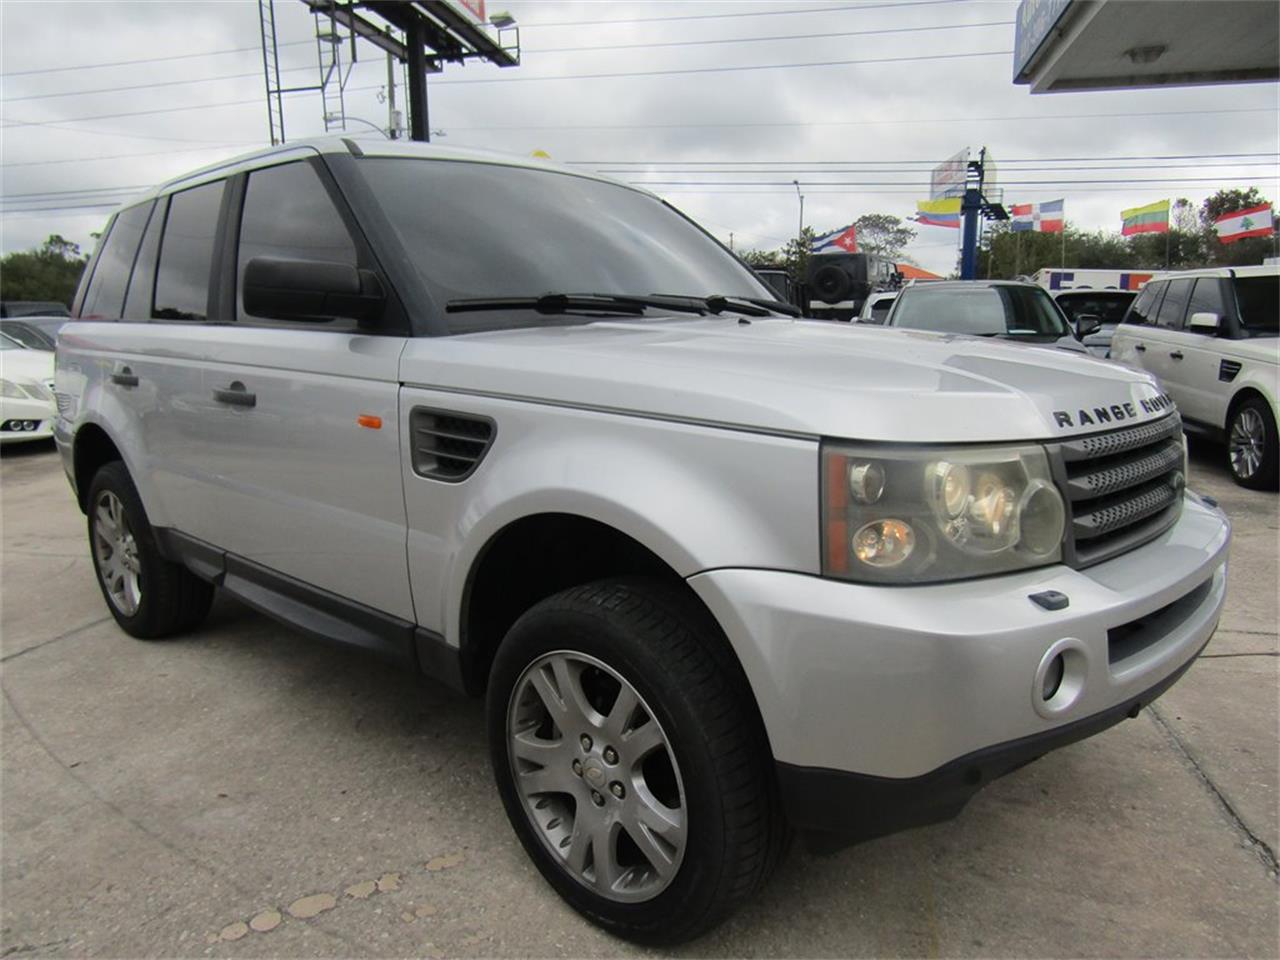 2006 Land Rover Range Rover Sport for Sale ClassicCars